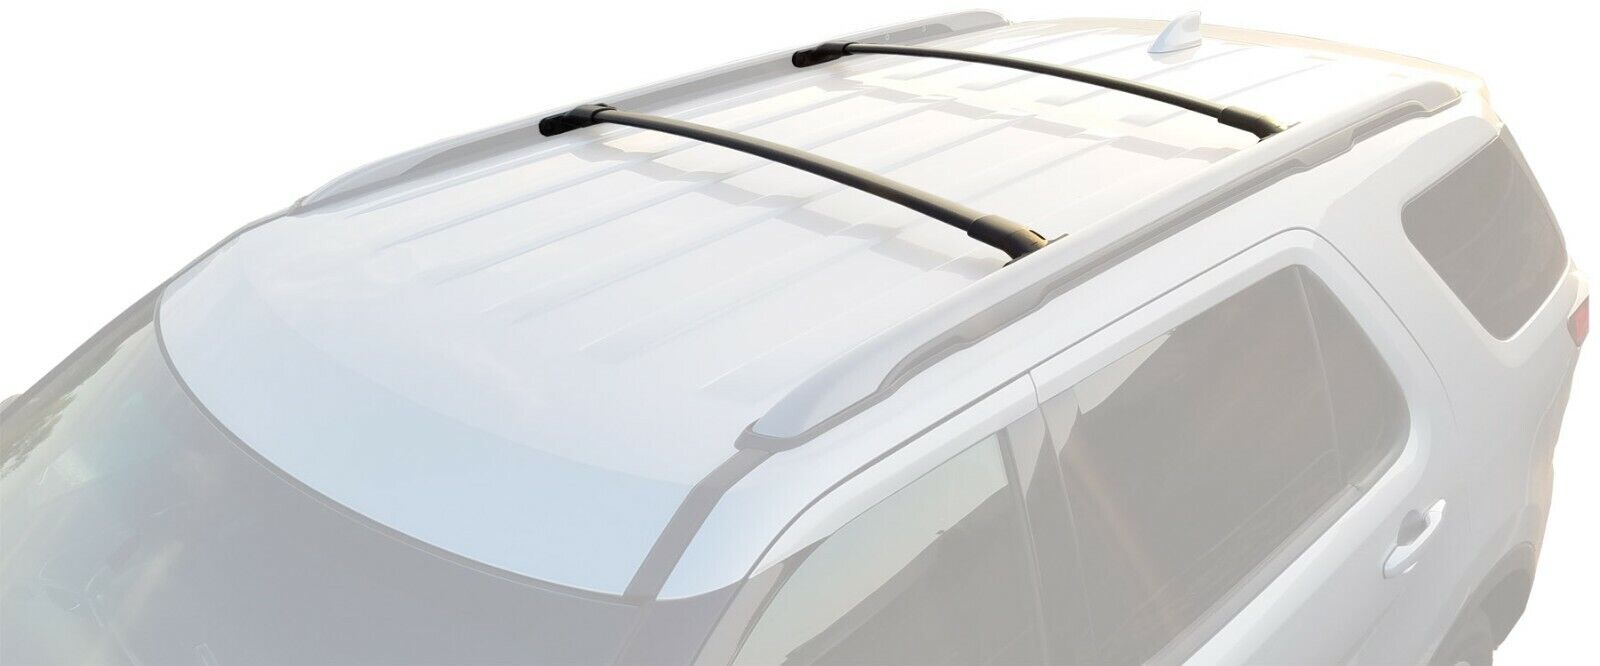 BRIGHTLINES Cross Bar Luggage Roof Racks Replacement For 2016-2019 Ford Explorer